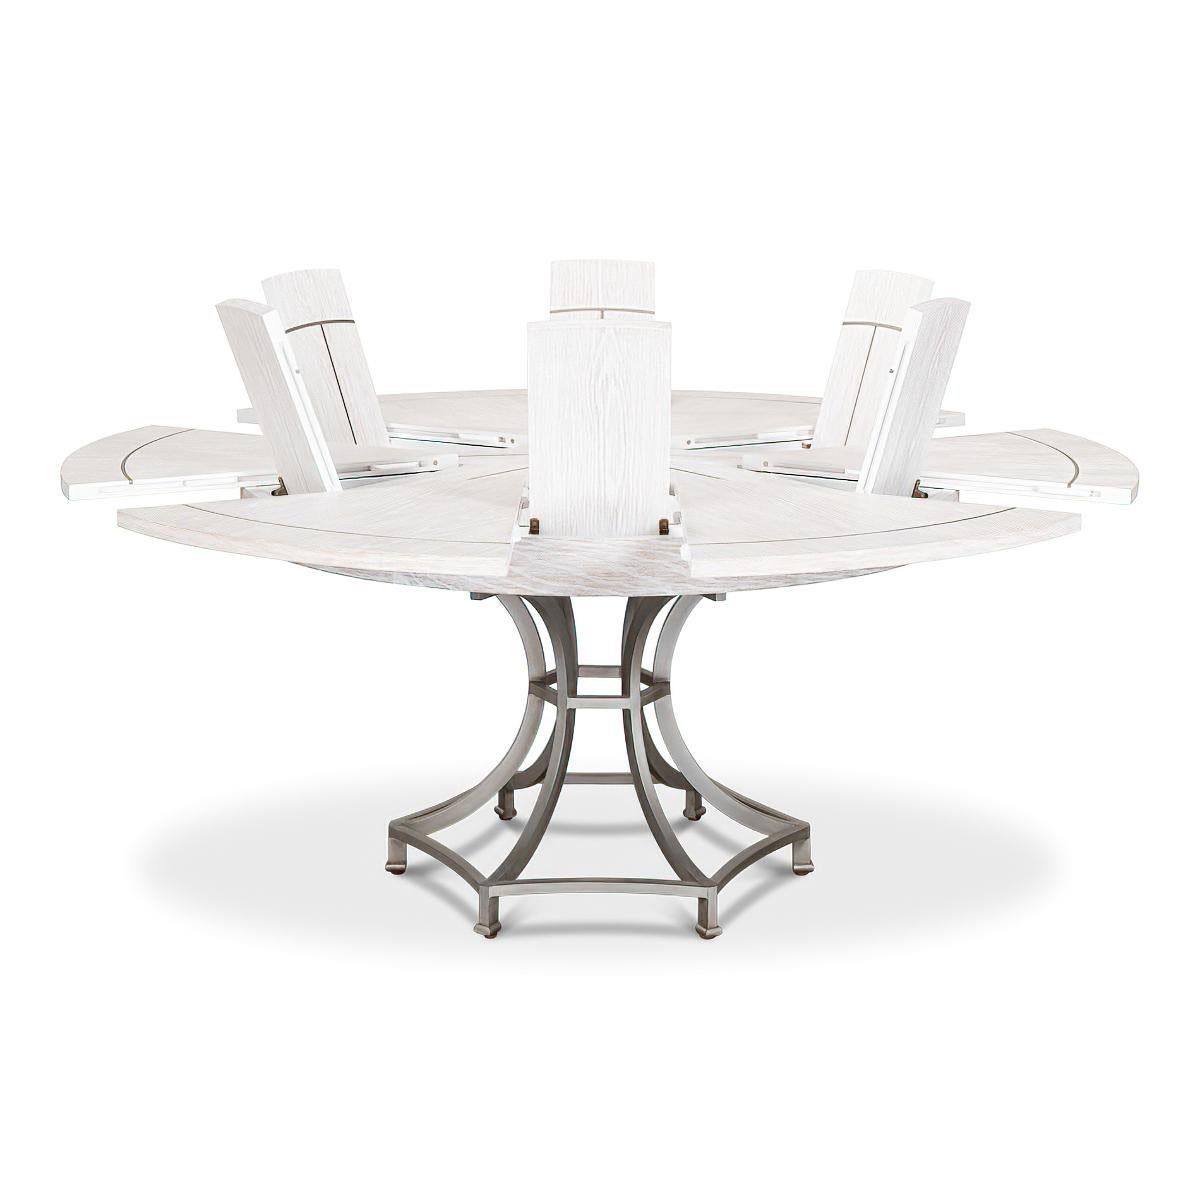 Asian Modern Industrial Round Dining Table, White Wash